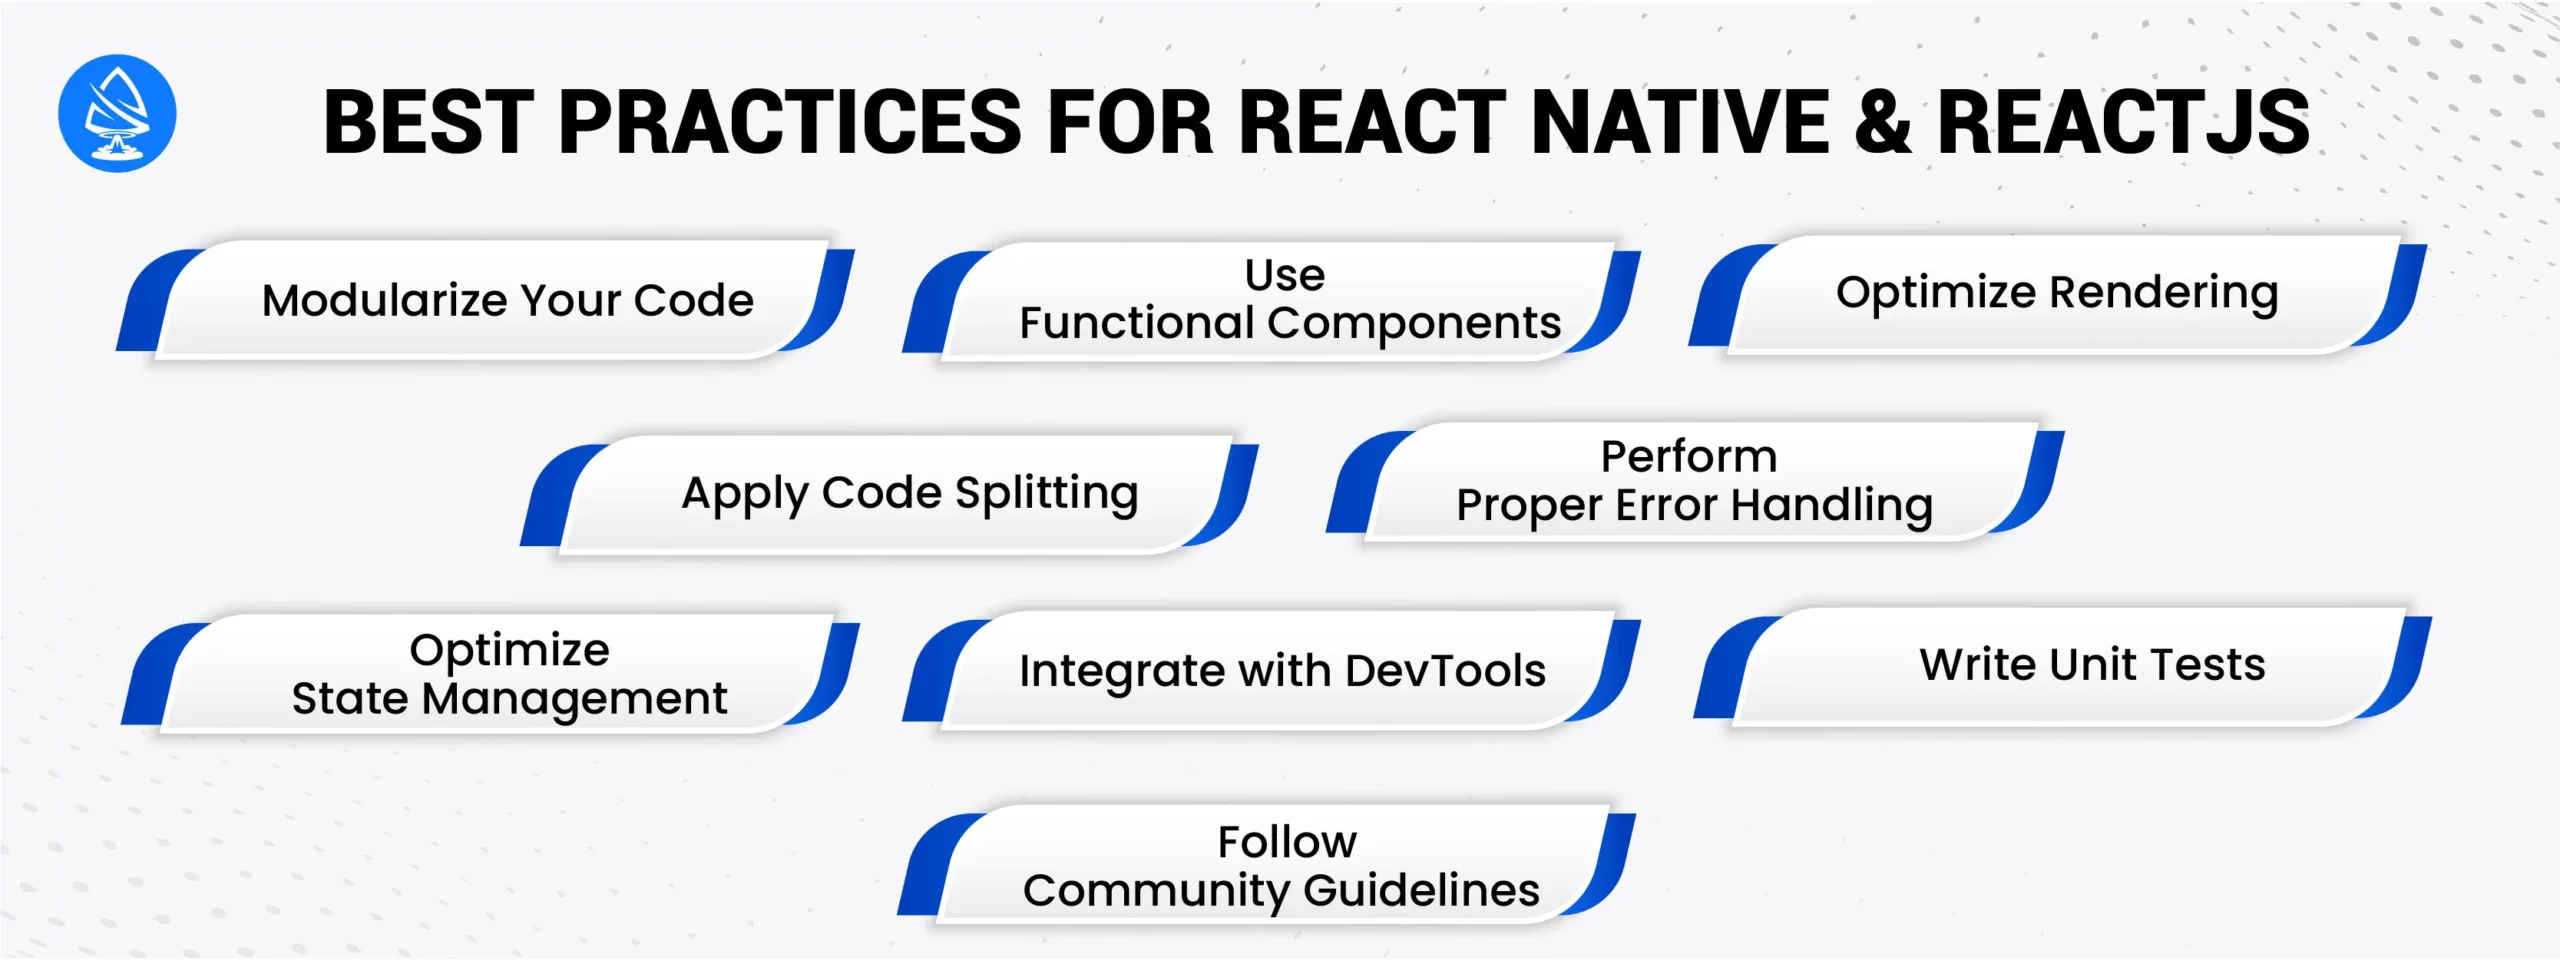 Best Practices for React Native and React JS Development